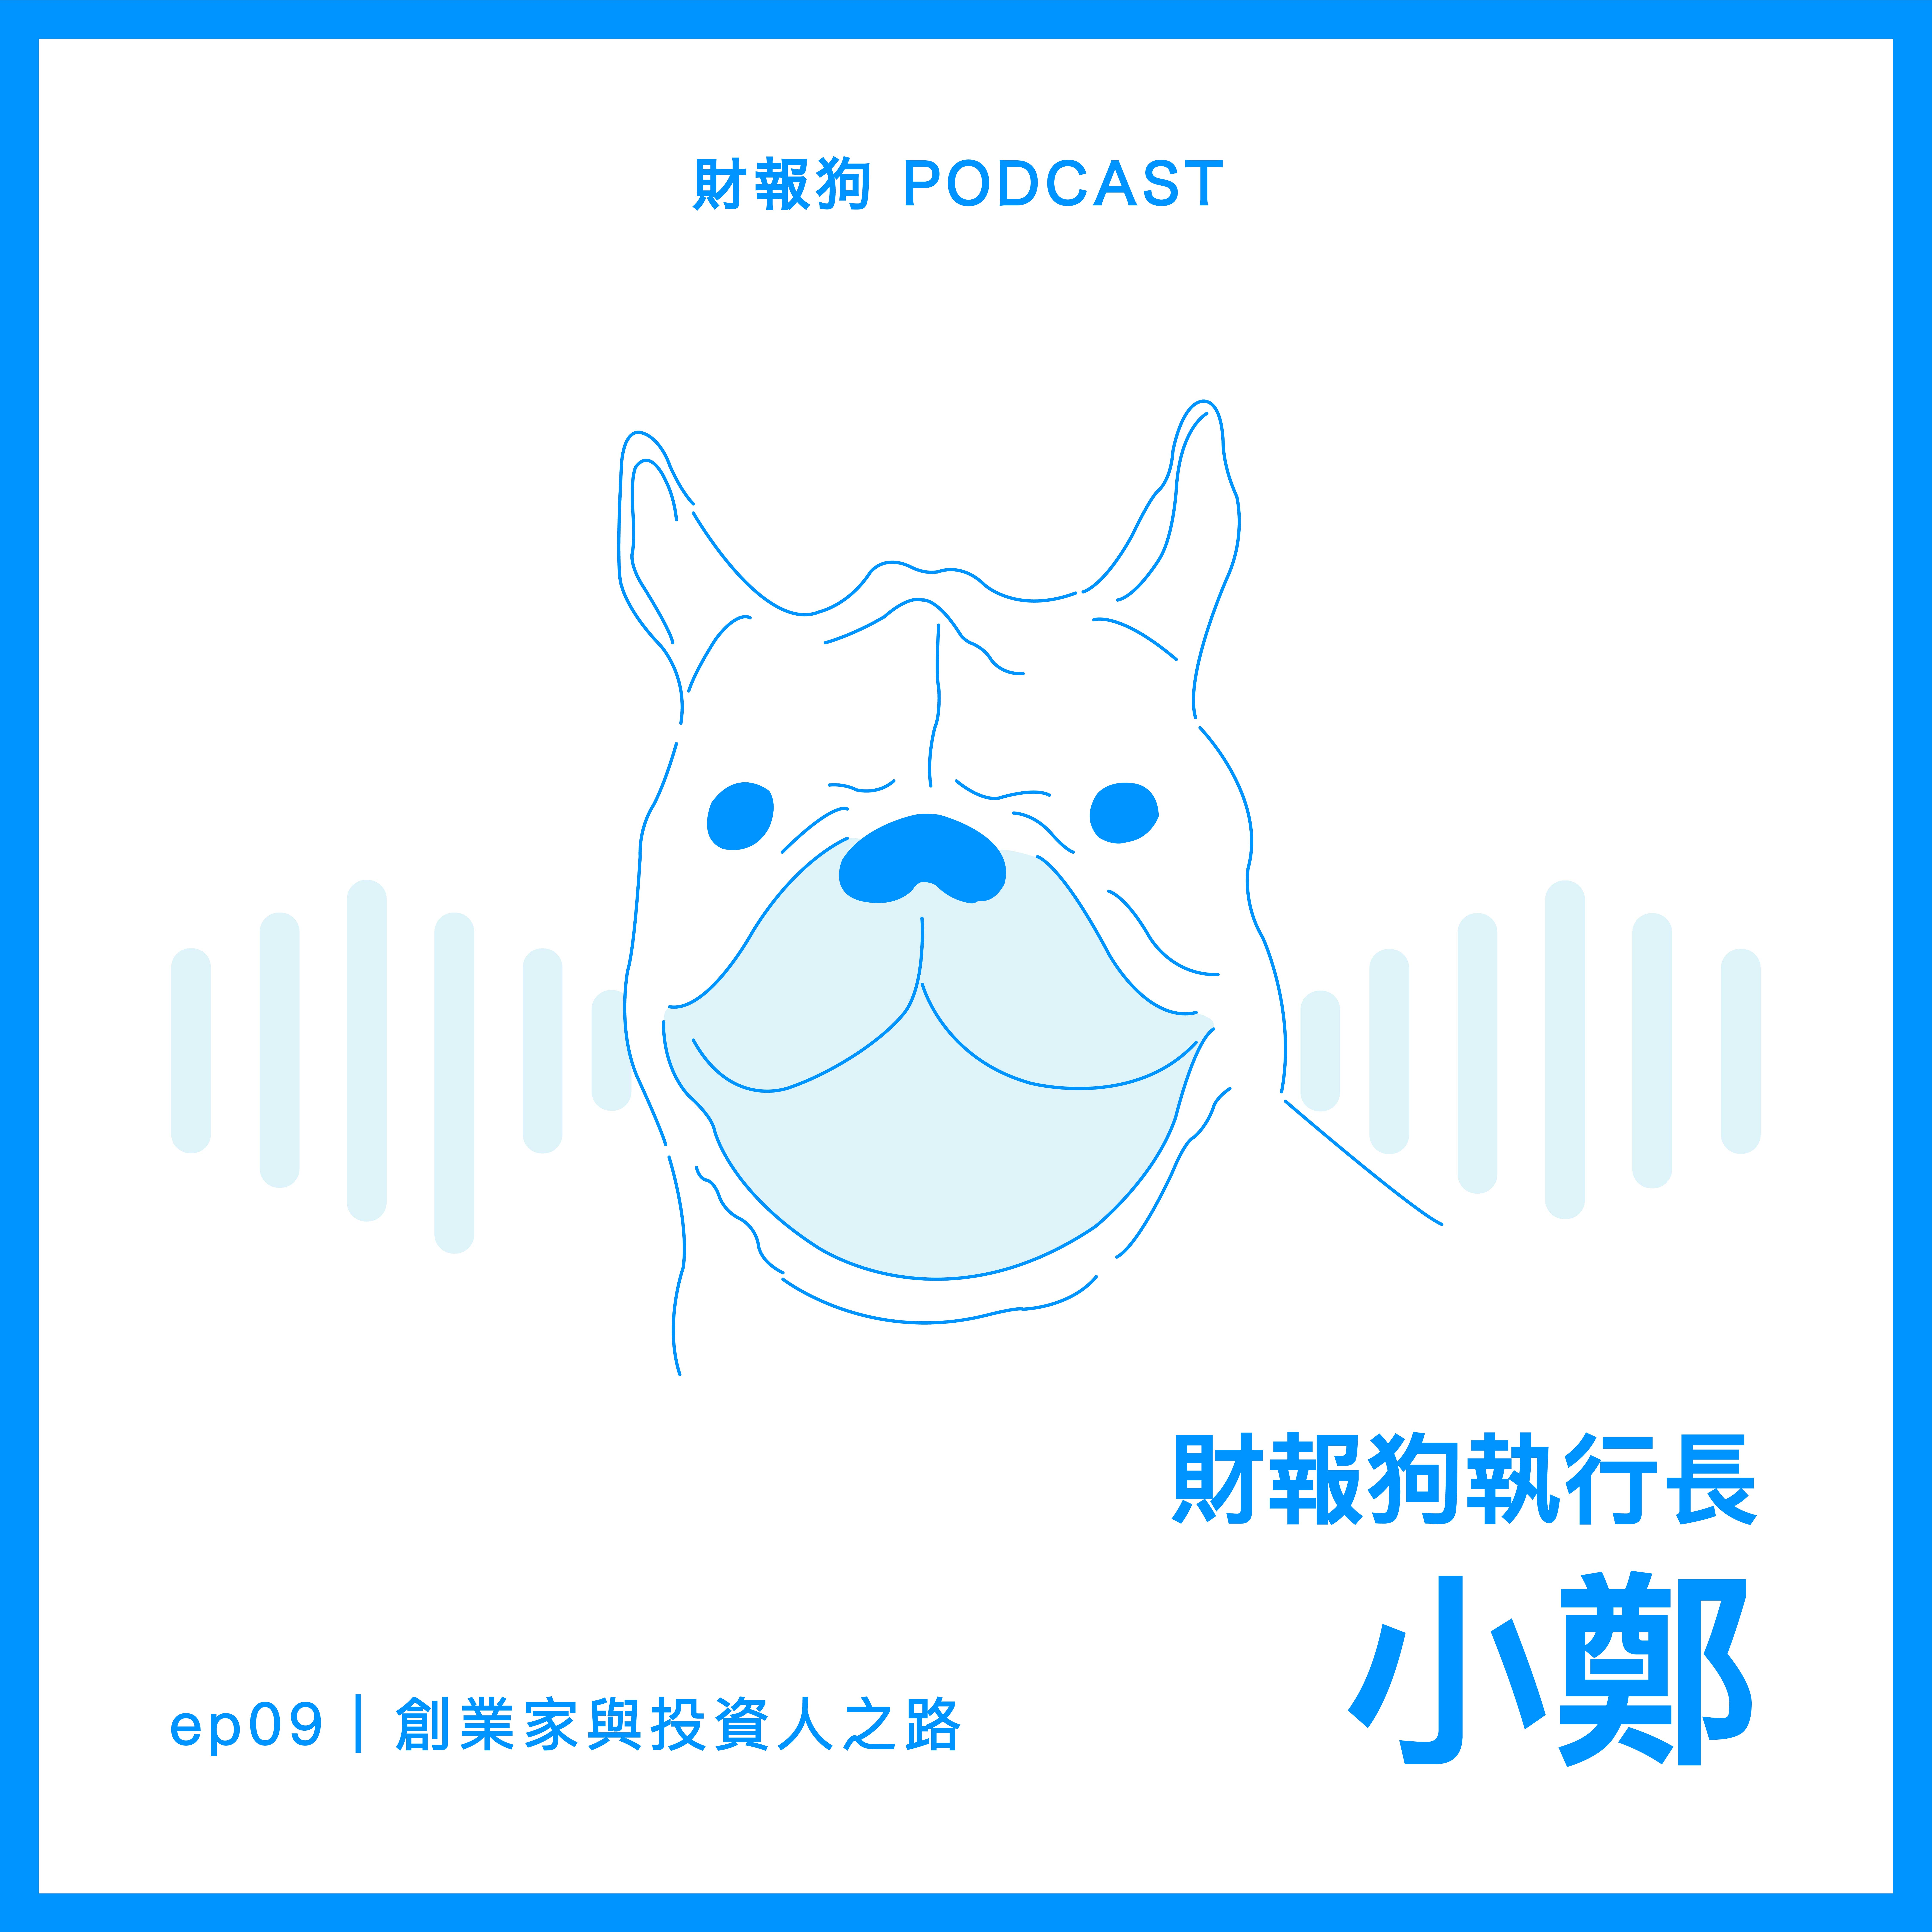 podcastcover_ep09@3x-20